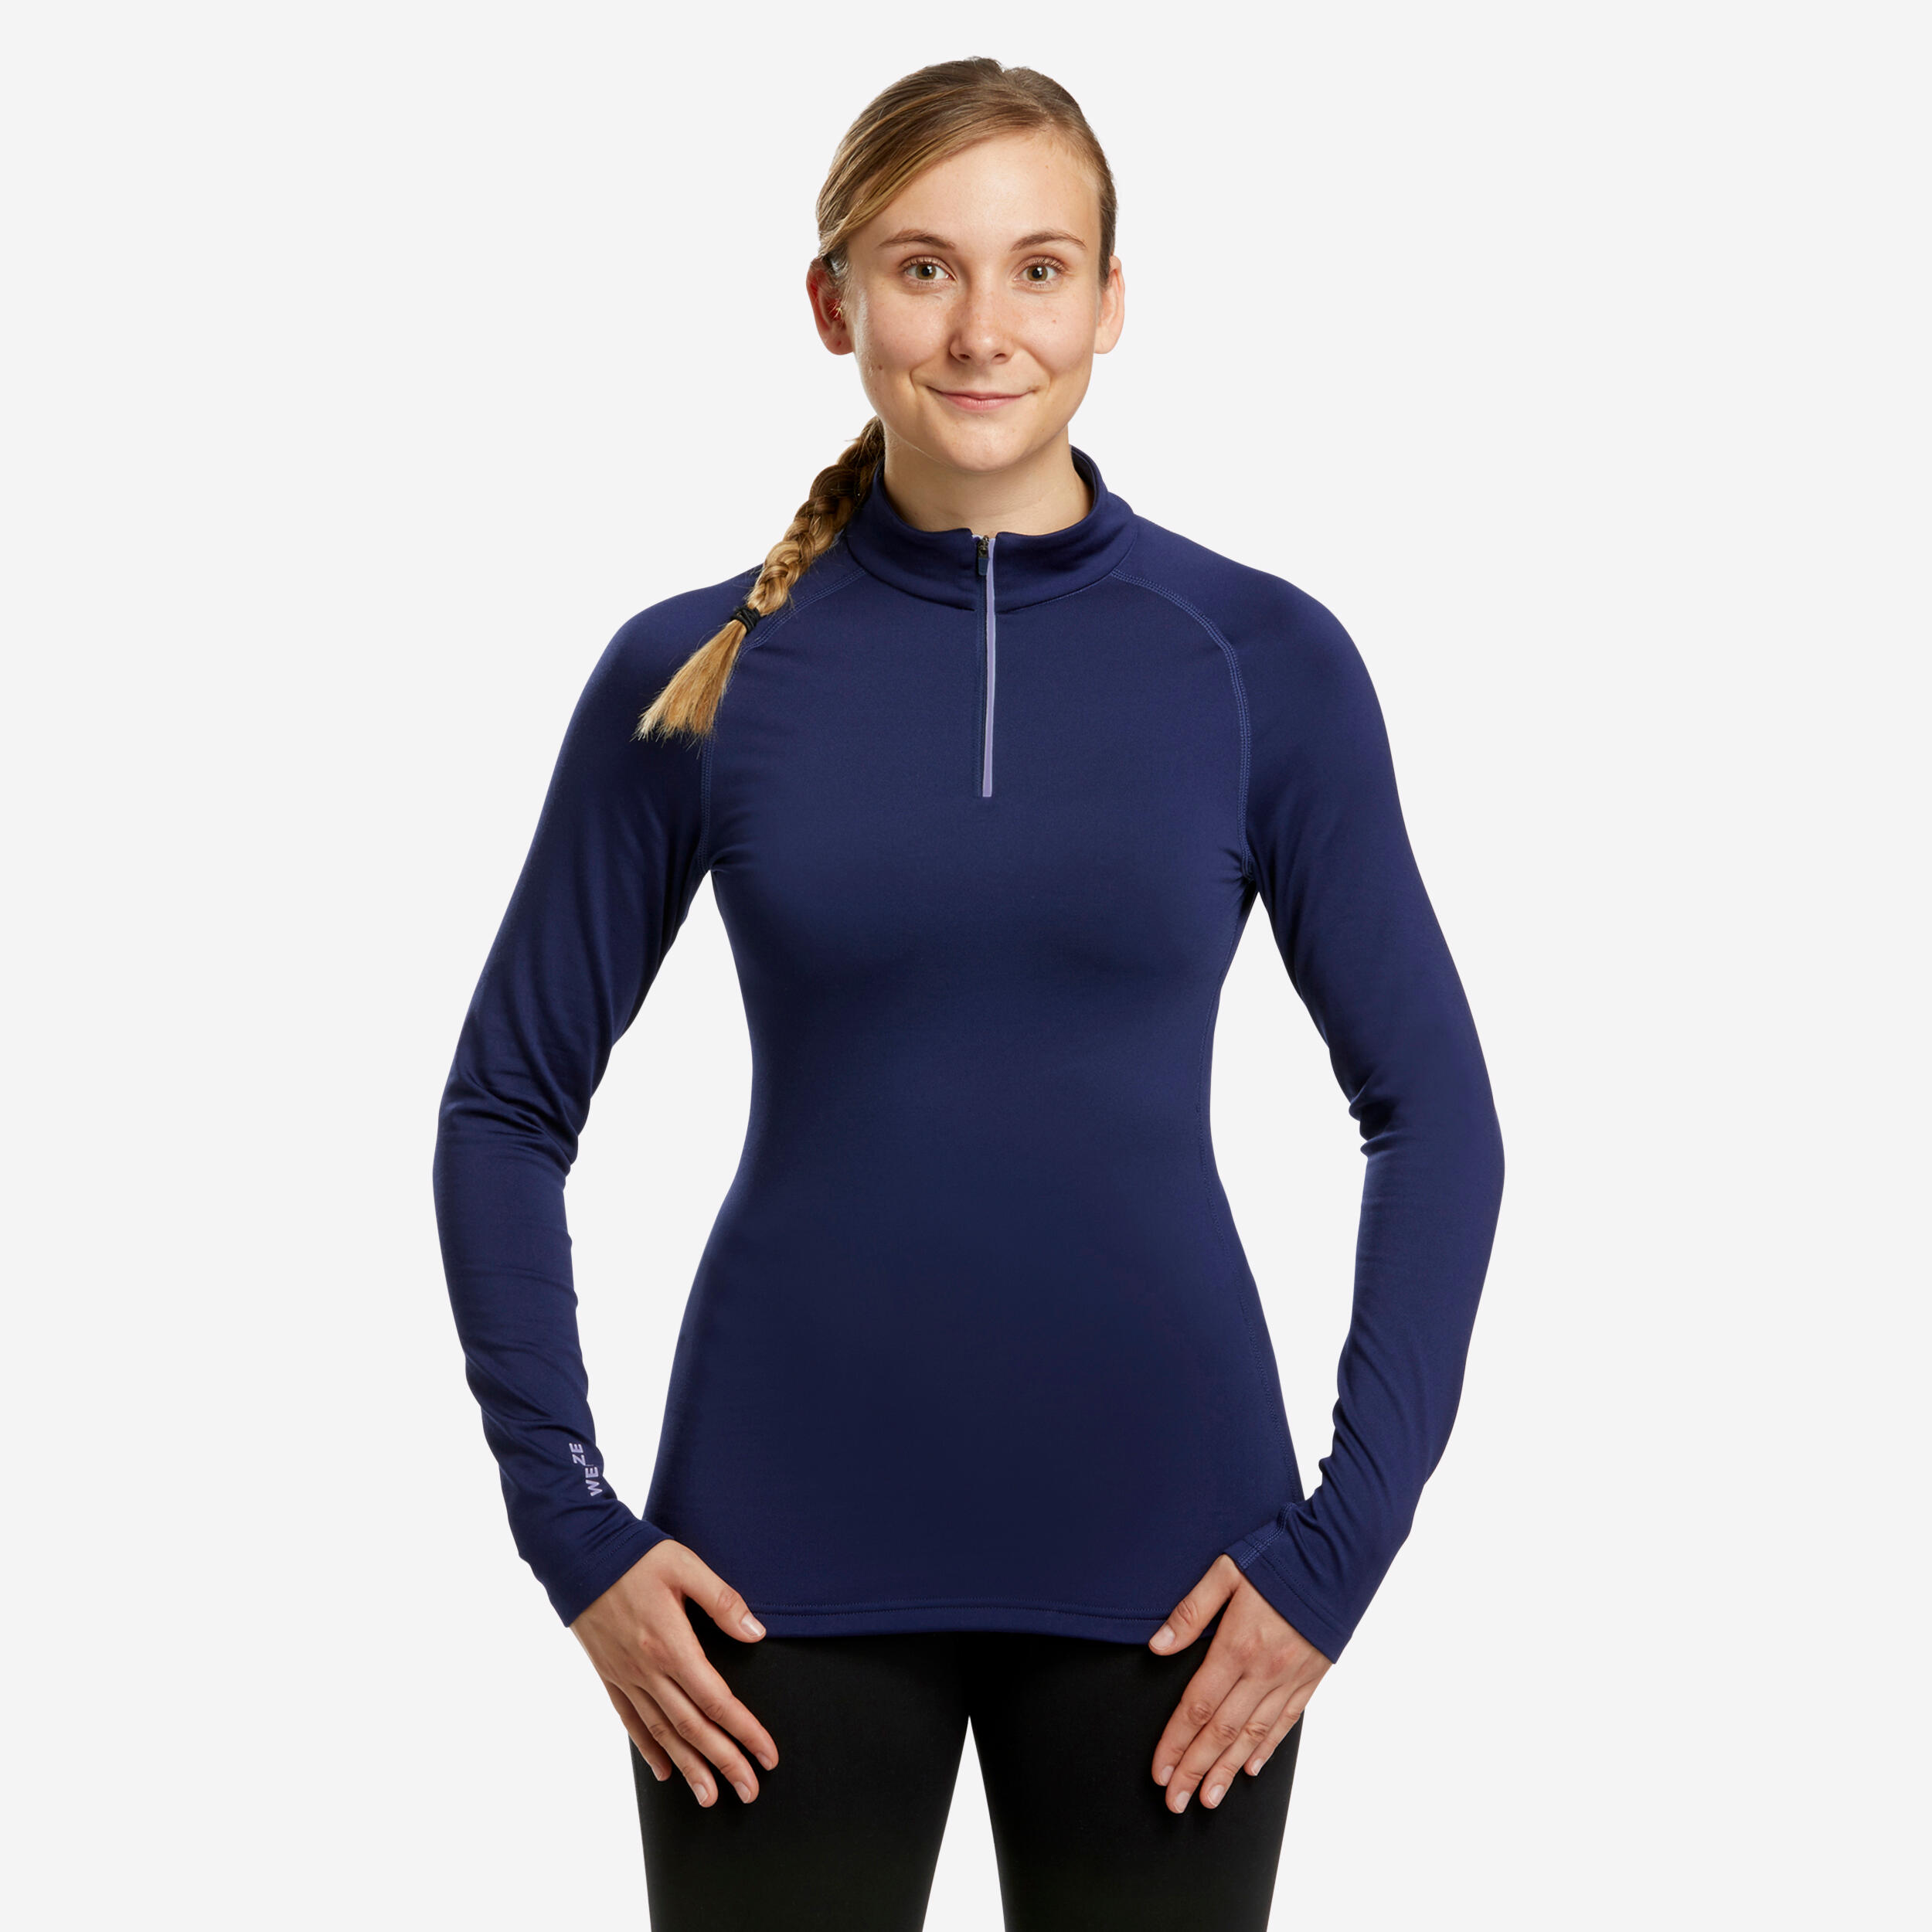 Women's Base Layer Top with Half-Zip - 500 Blue - Galaxy blue